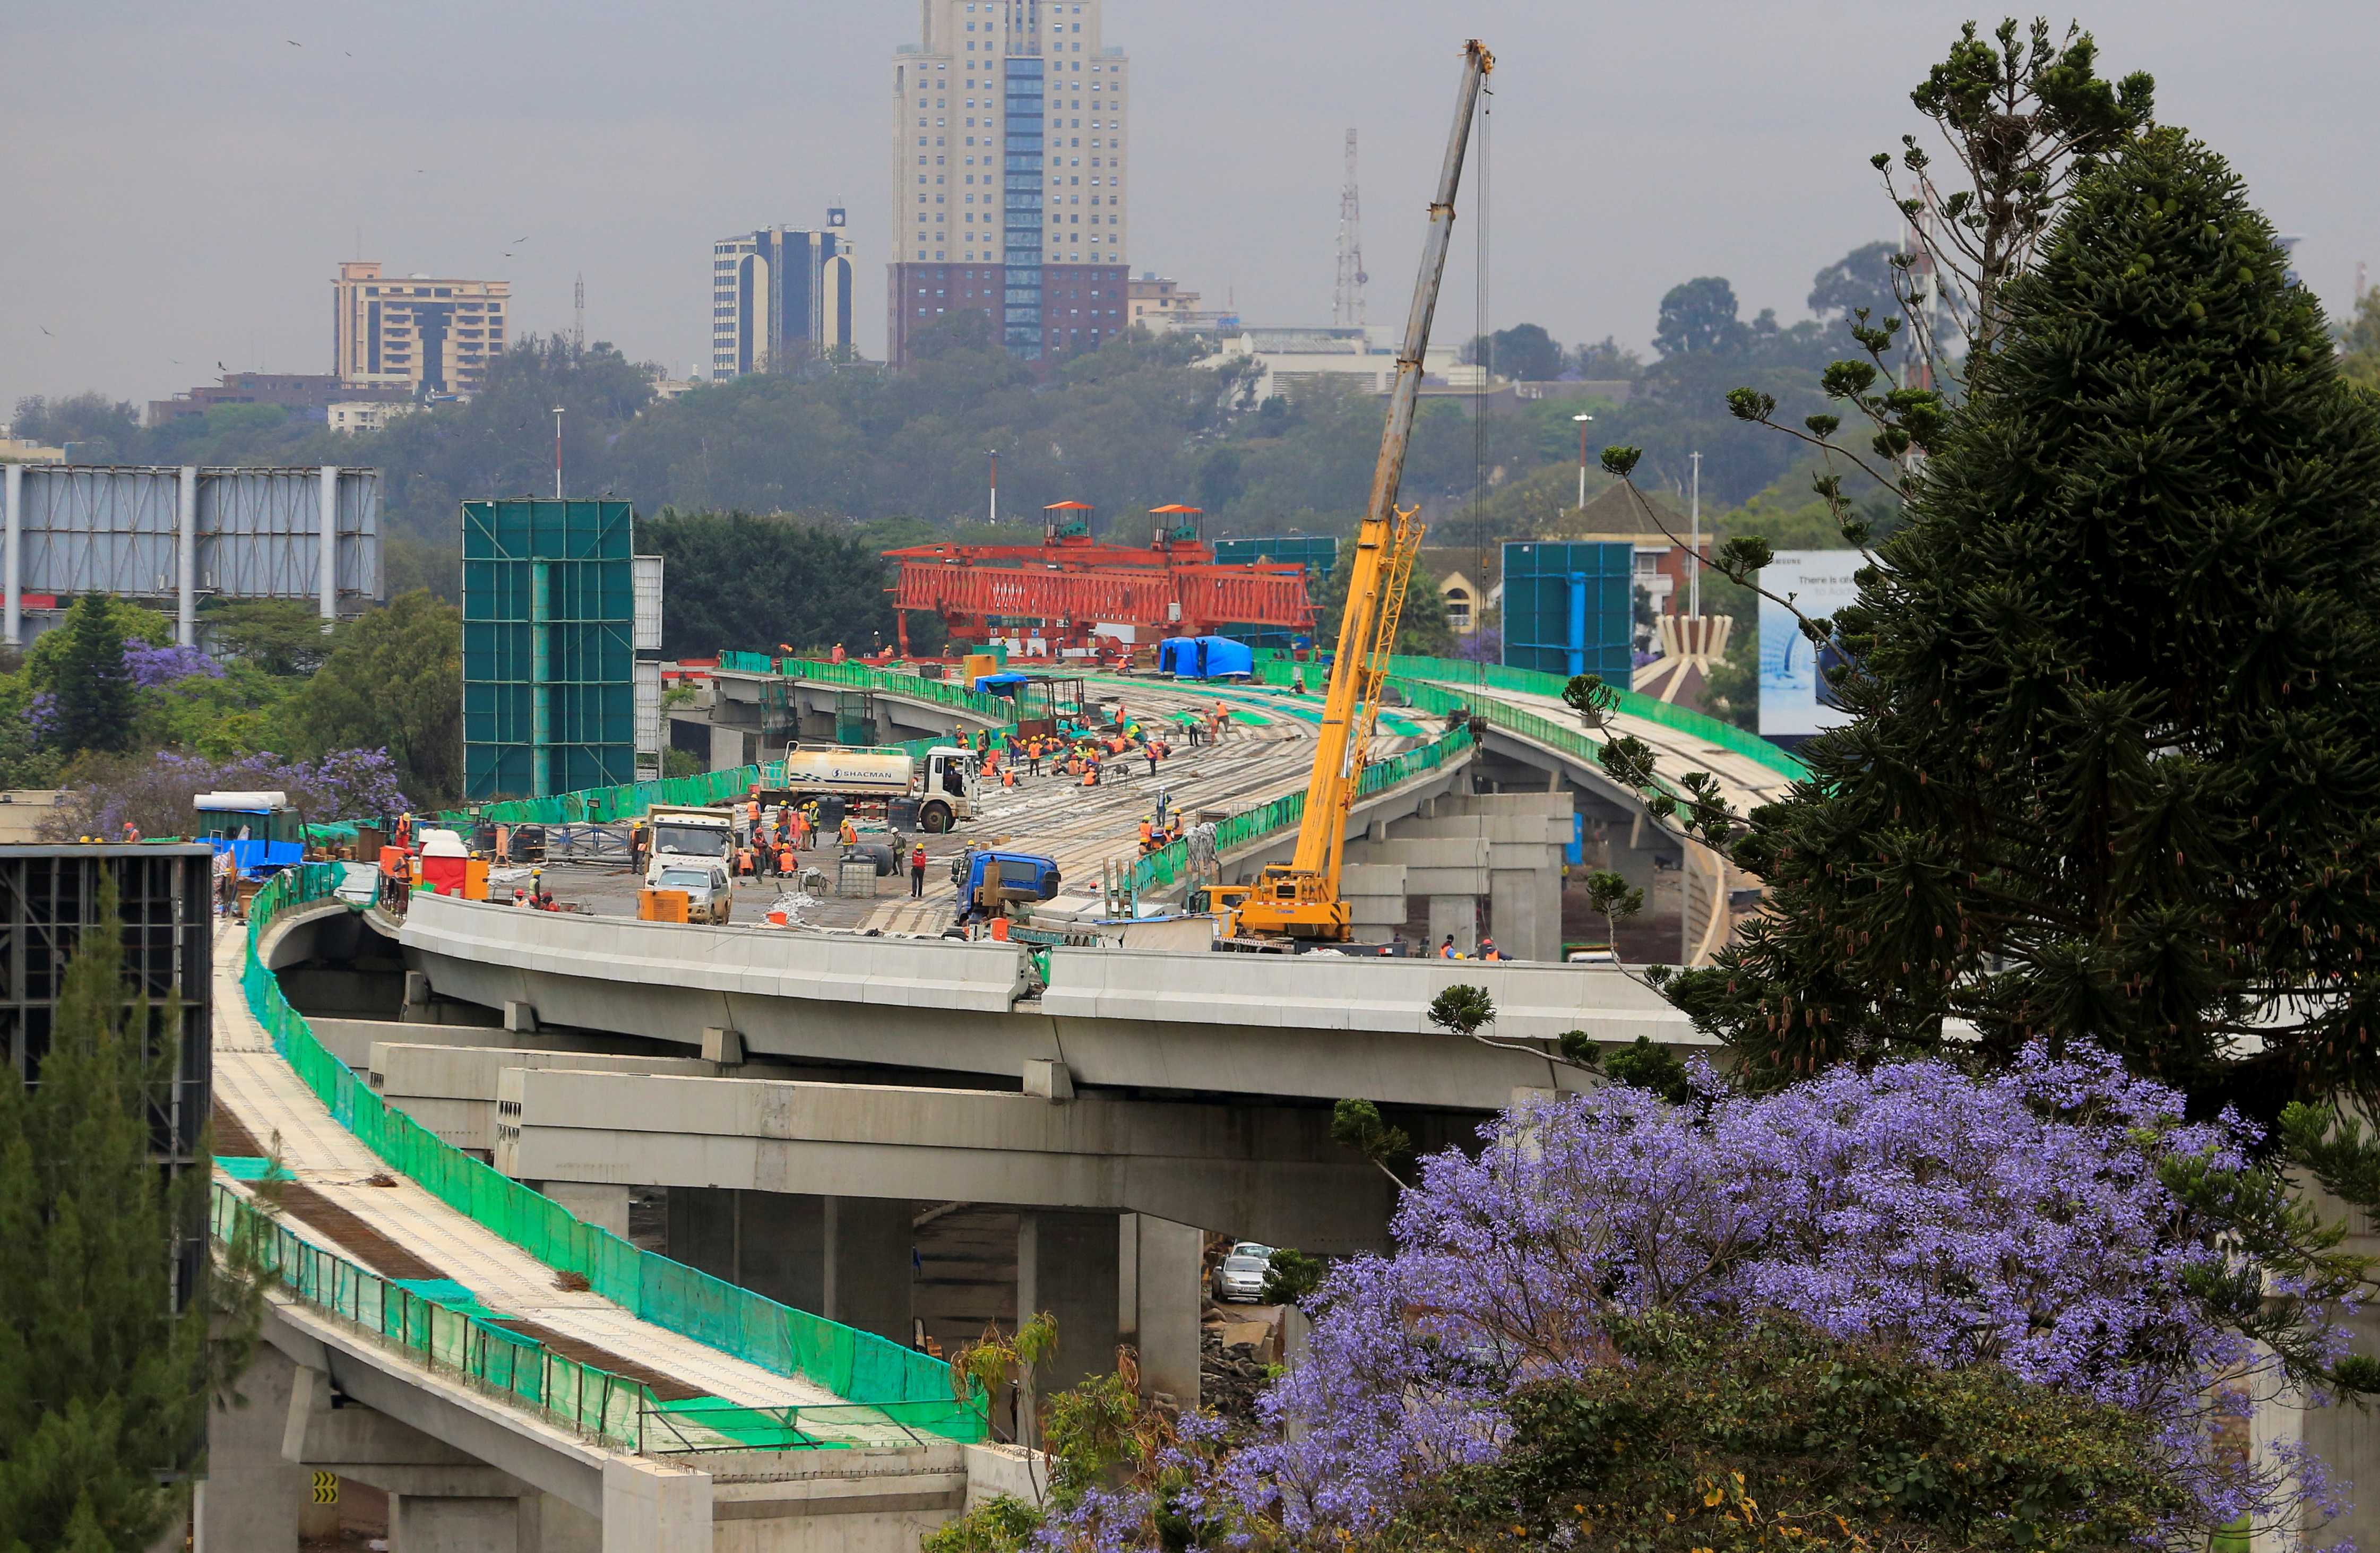 Workers are seen on site during the construction of the Nairobi Expressway, in Nairobi